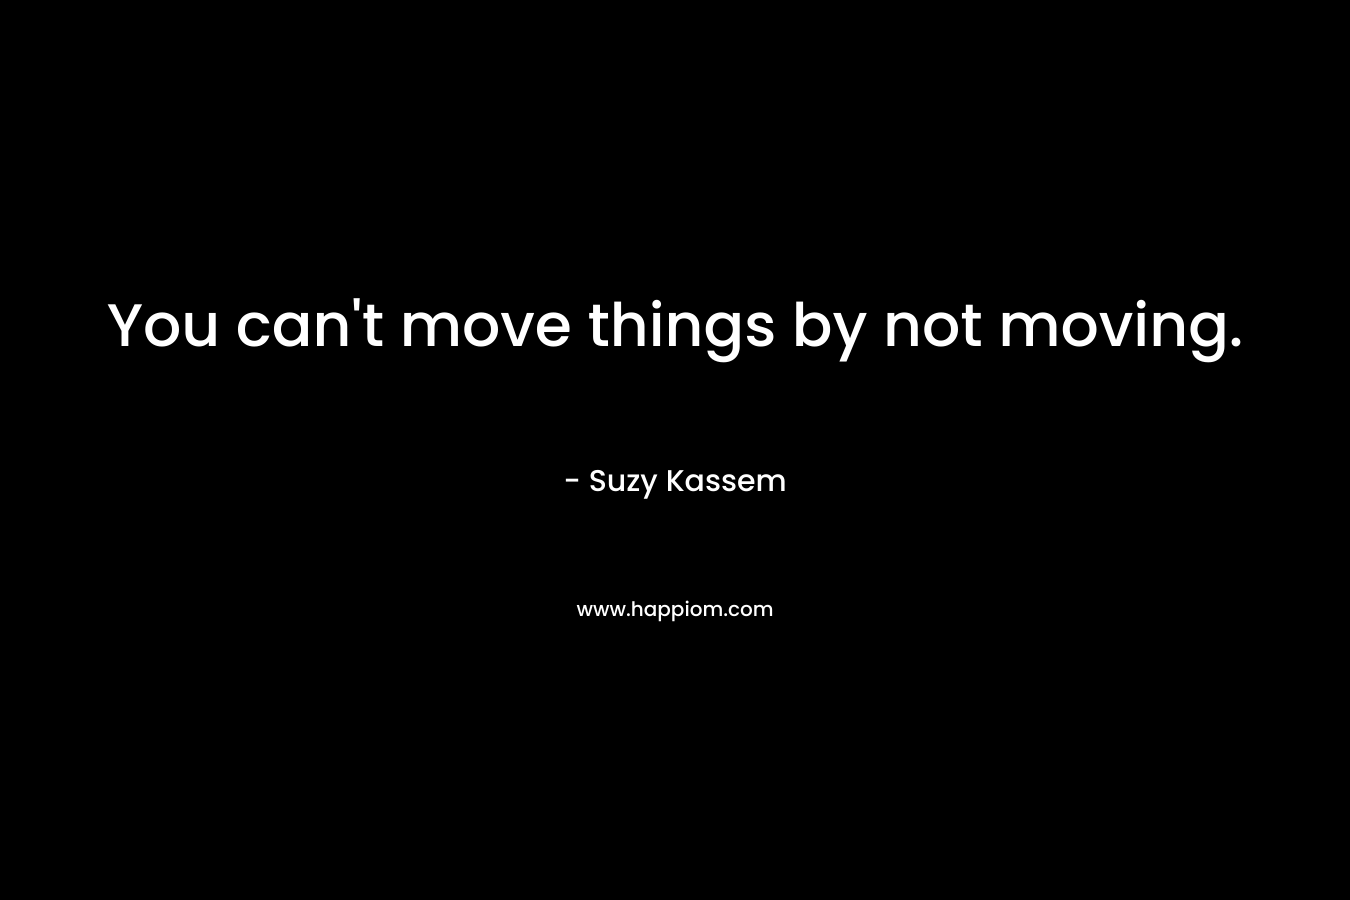 You can't move things by not moving.